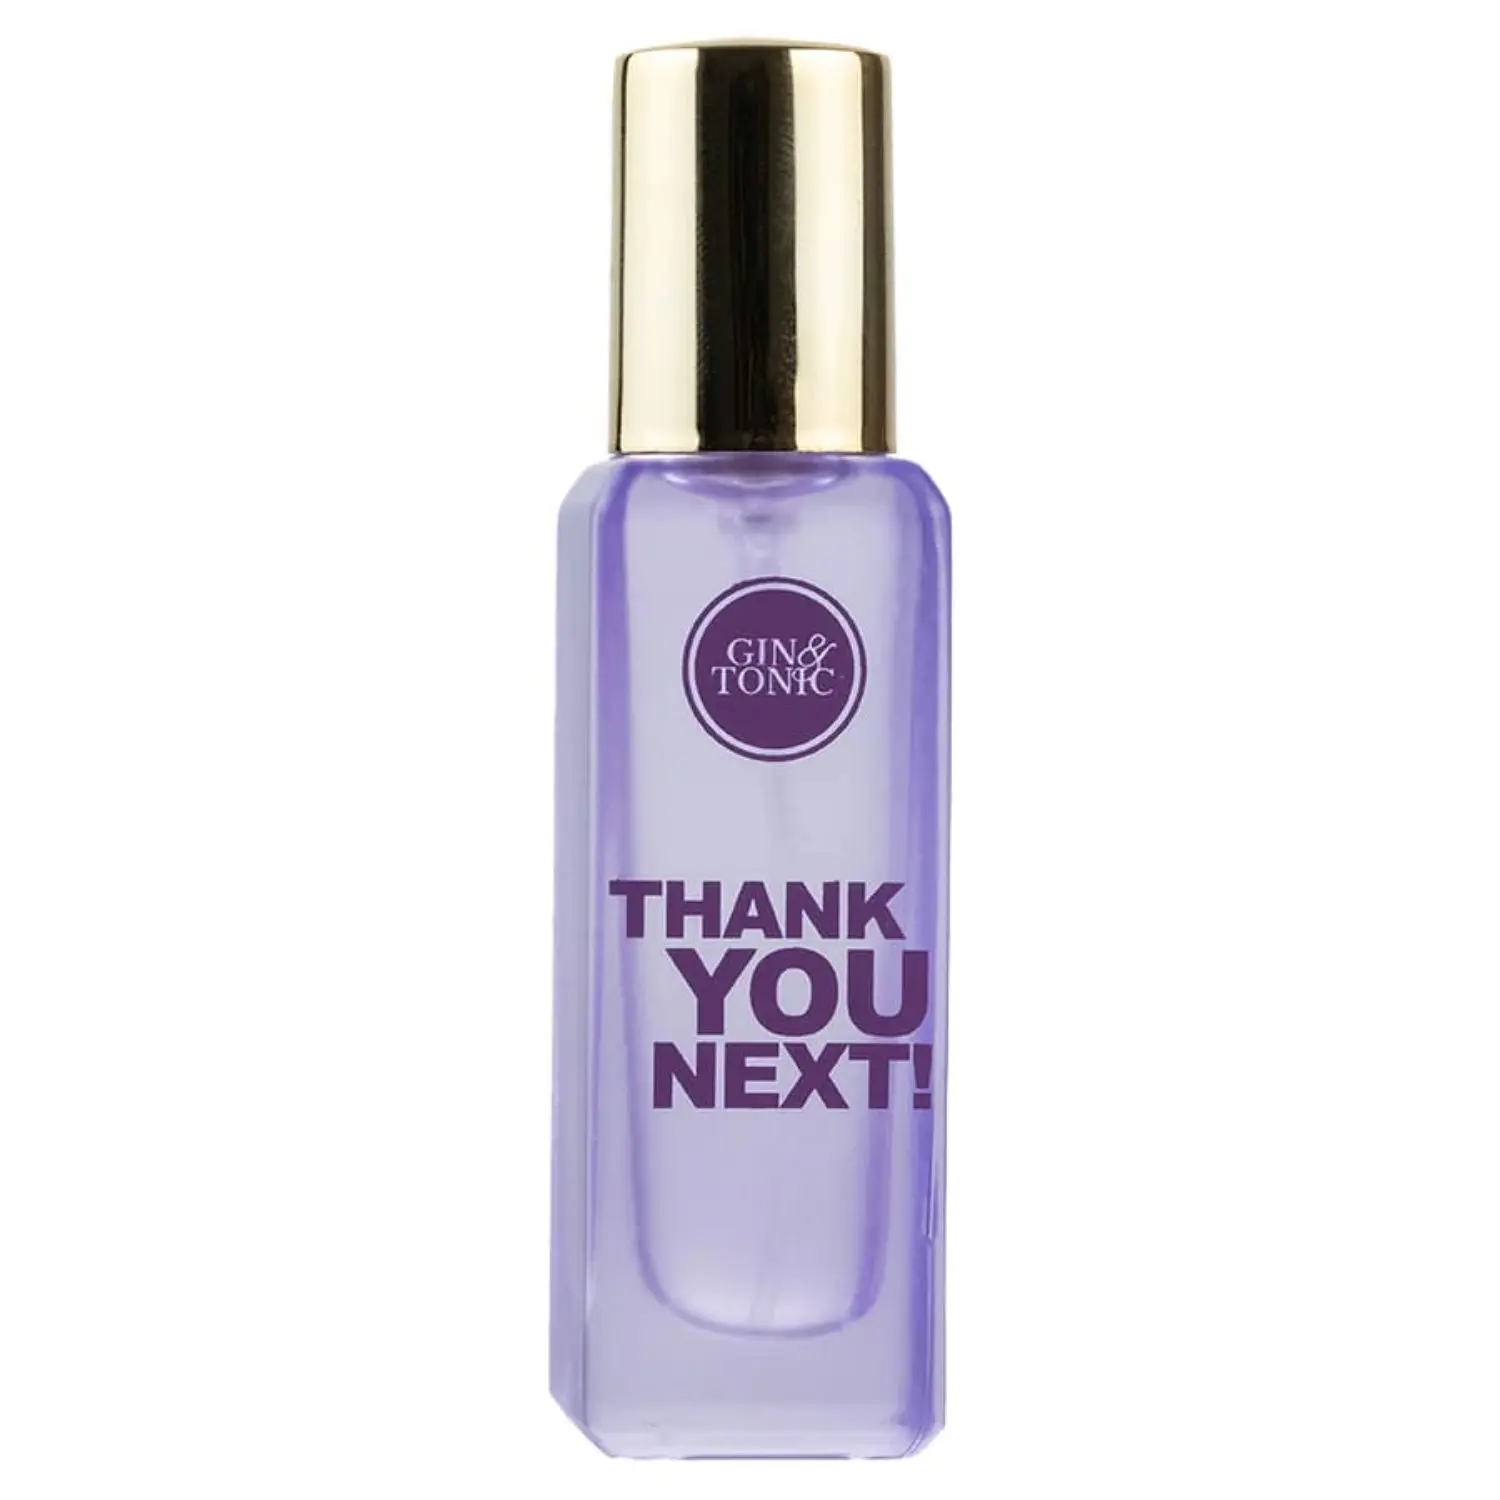 Gin & Tonic - Thank you Next by Perfume Lounge | Womens Long-lasting Fresh & Floral Perfume 20 ml